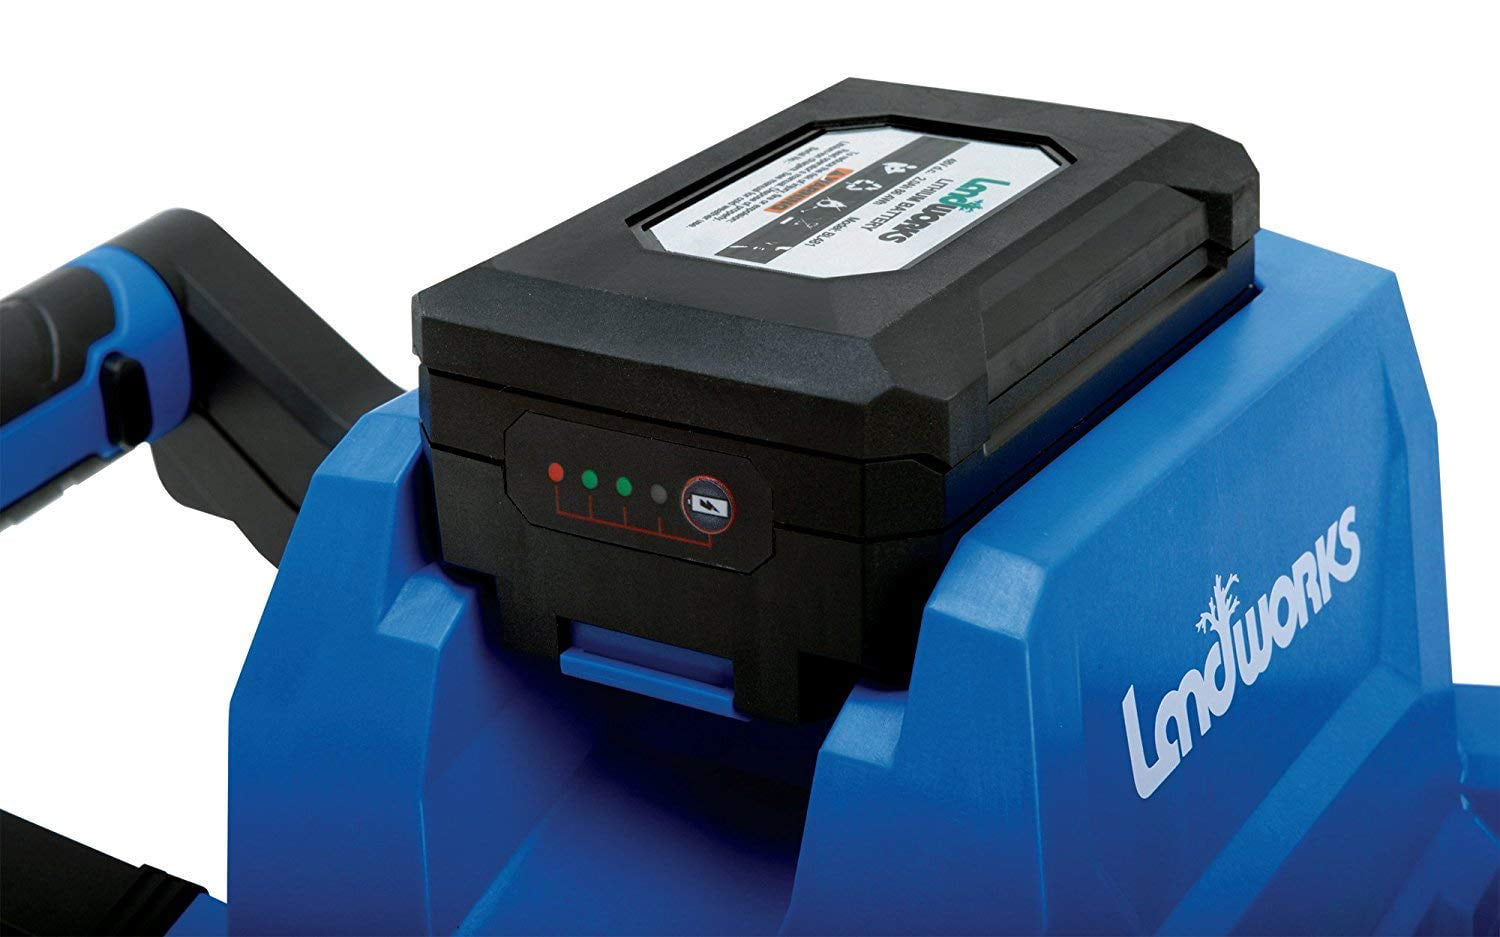 LARGE LANDWORKS Heavy Duty Pro Large Lithium Ion Battery 2 AMP Hours 